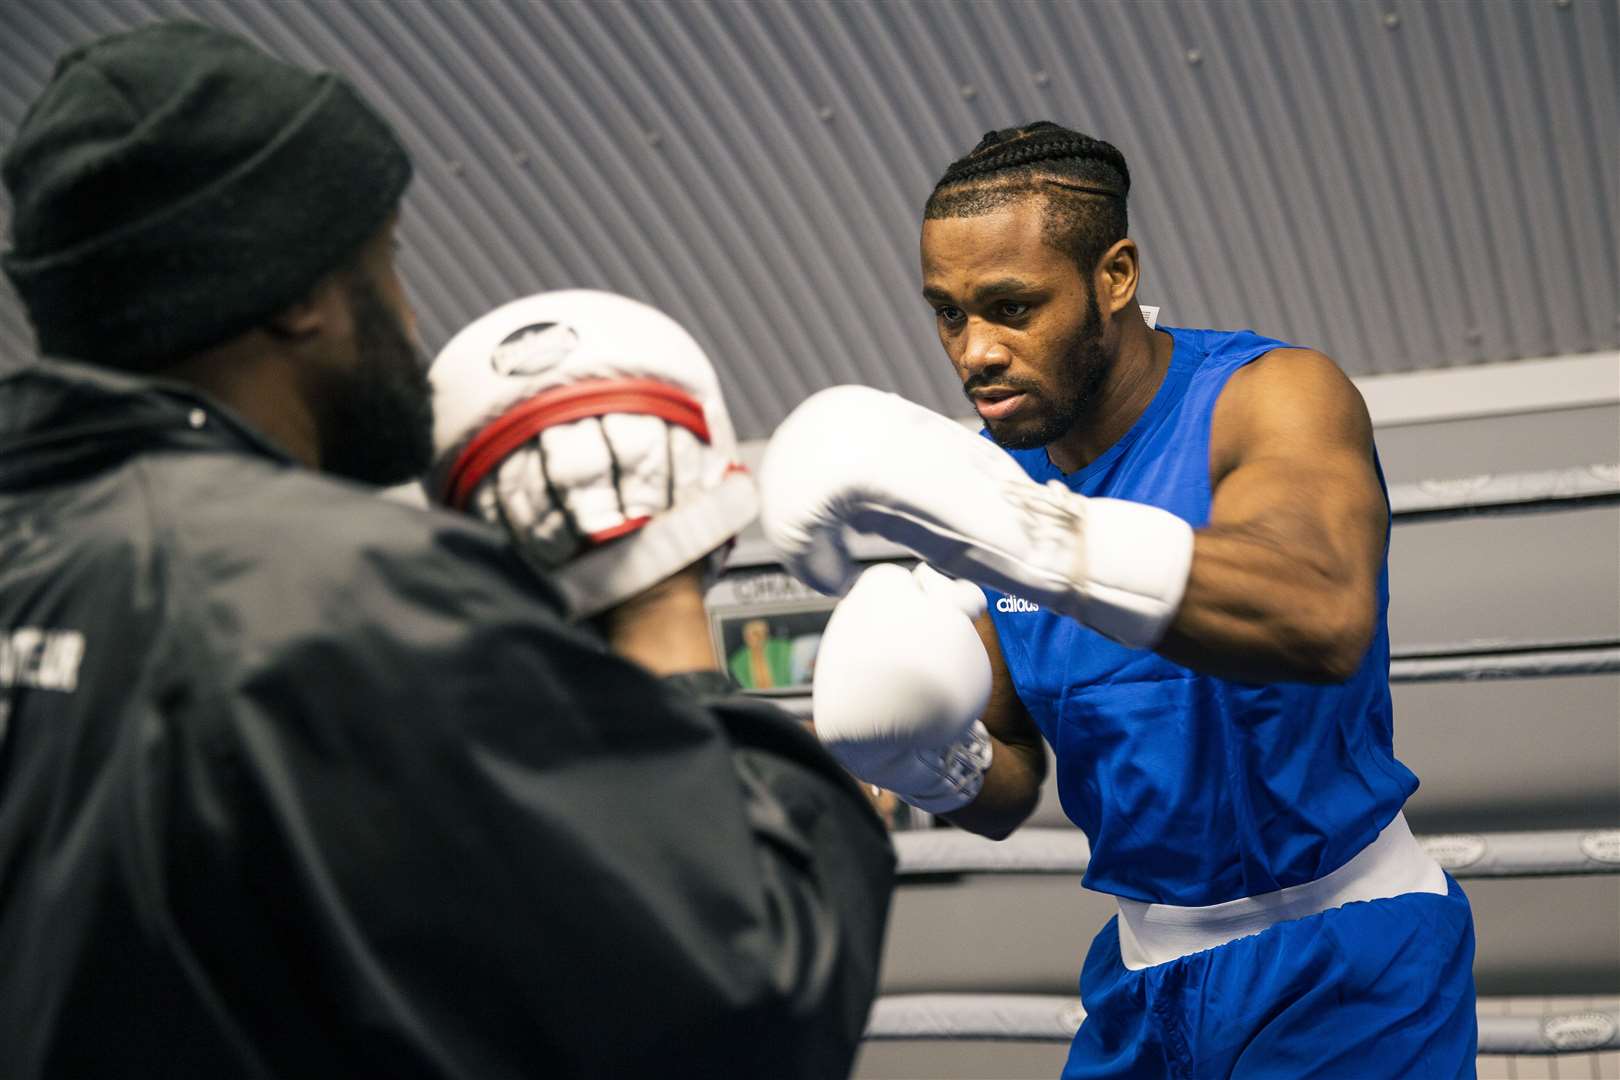 Gravesend boxer Cheavon Clarke trains at the Gravesham Amateur Boxing Club. At the 2014 Commonwealth Games he became pals with Usain Bolt over games of Call of Duty. Picture: James Robinson